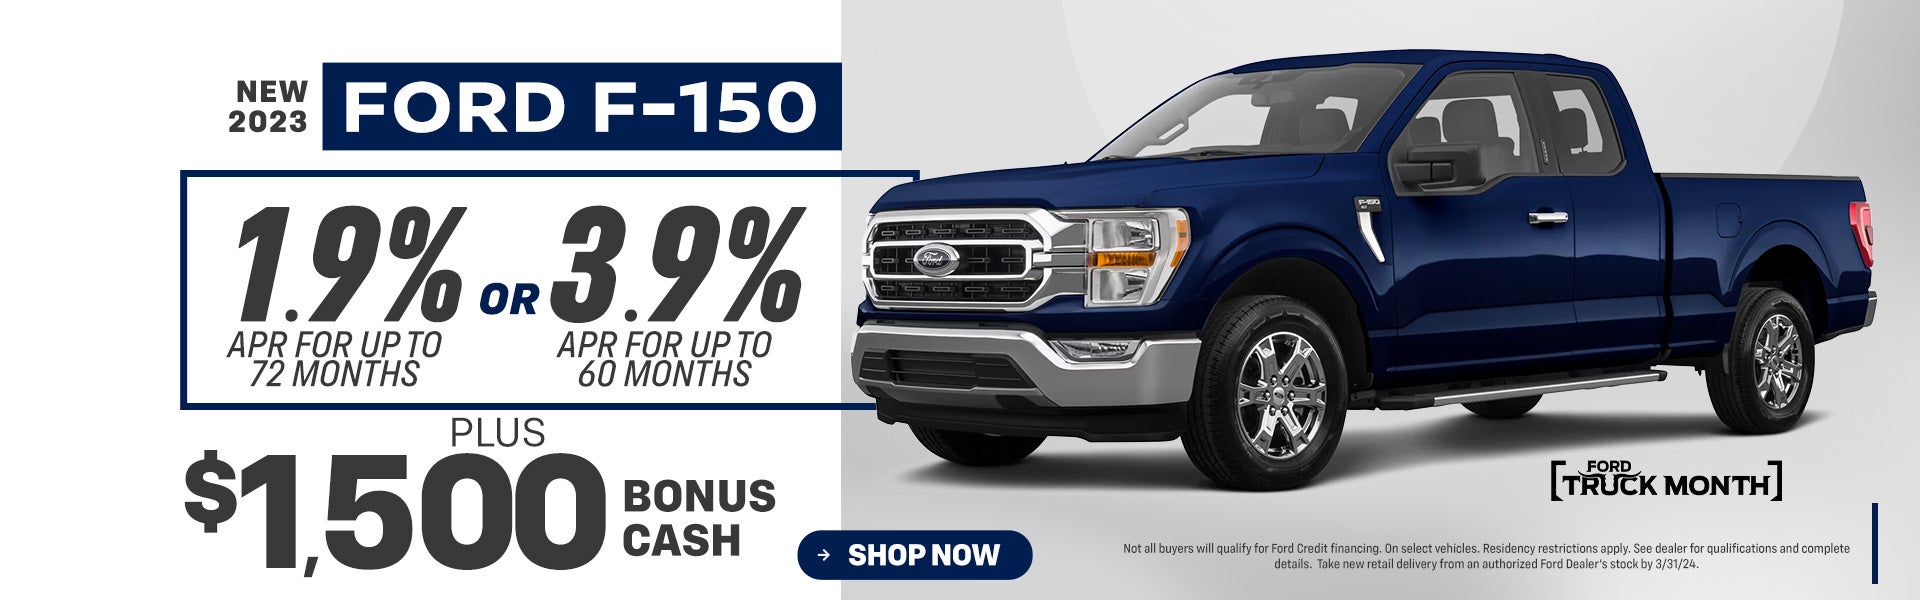 2023 F-150 1.9% for 72 months or 3.9% APR for 60 months plus